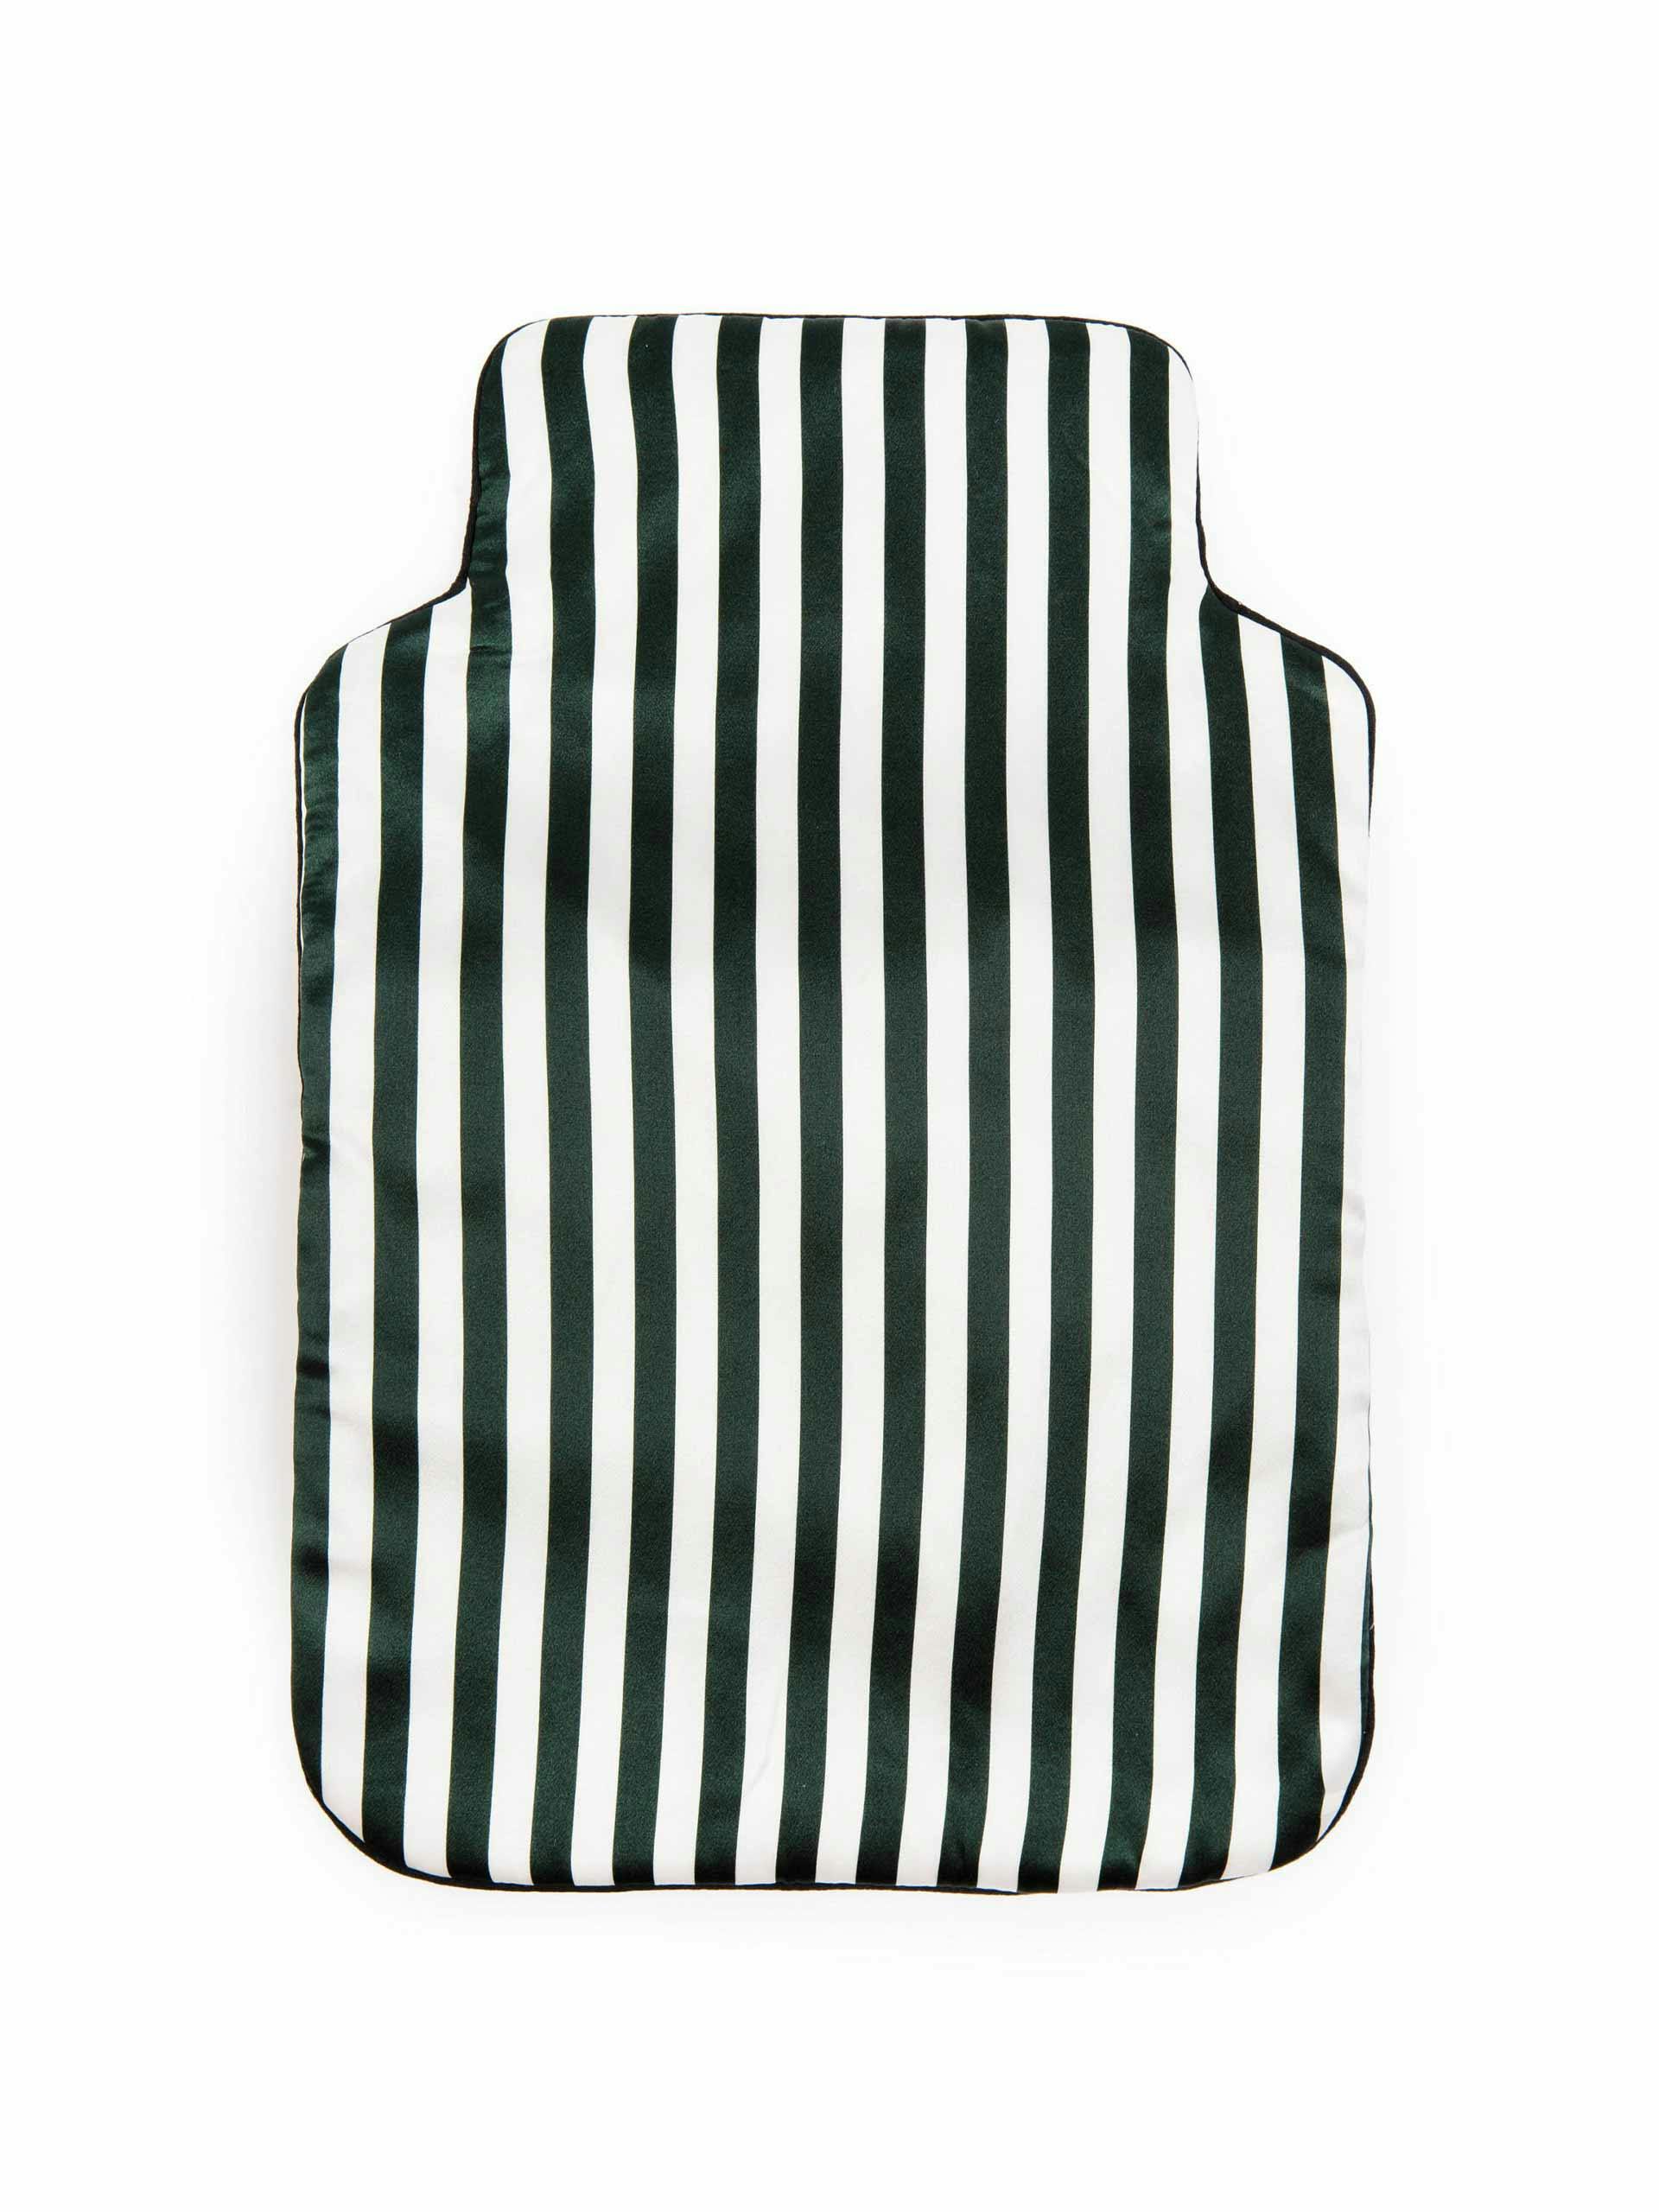 Green and ivory stripe hot water bottle cover